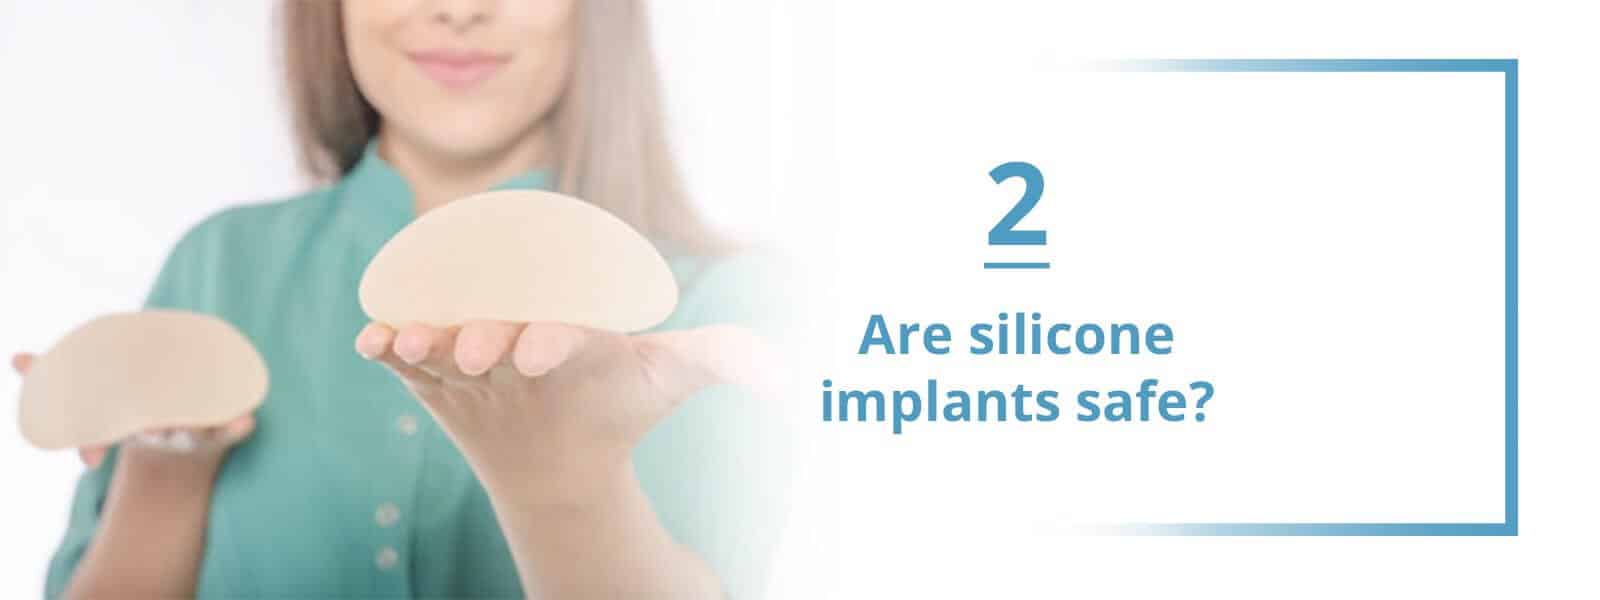 are silicone implants safe?